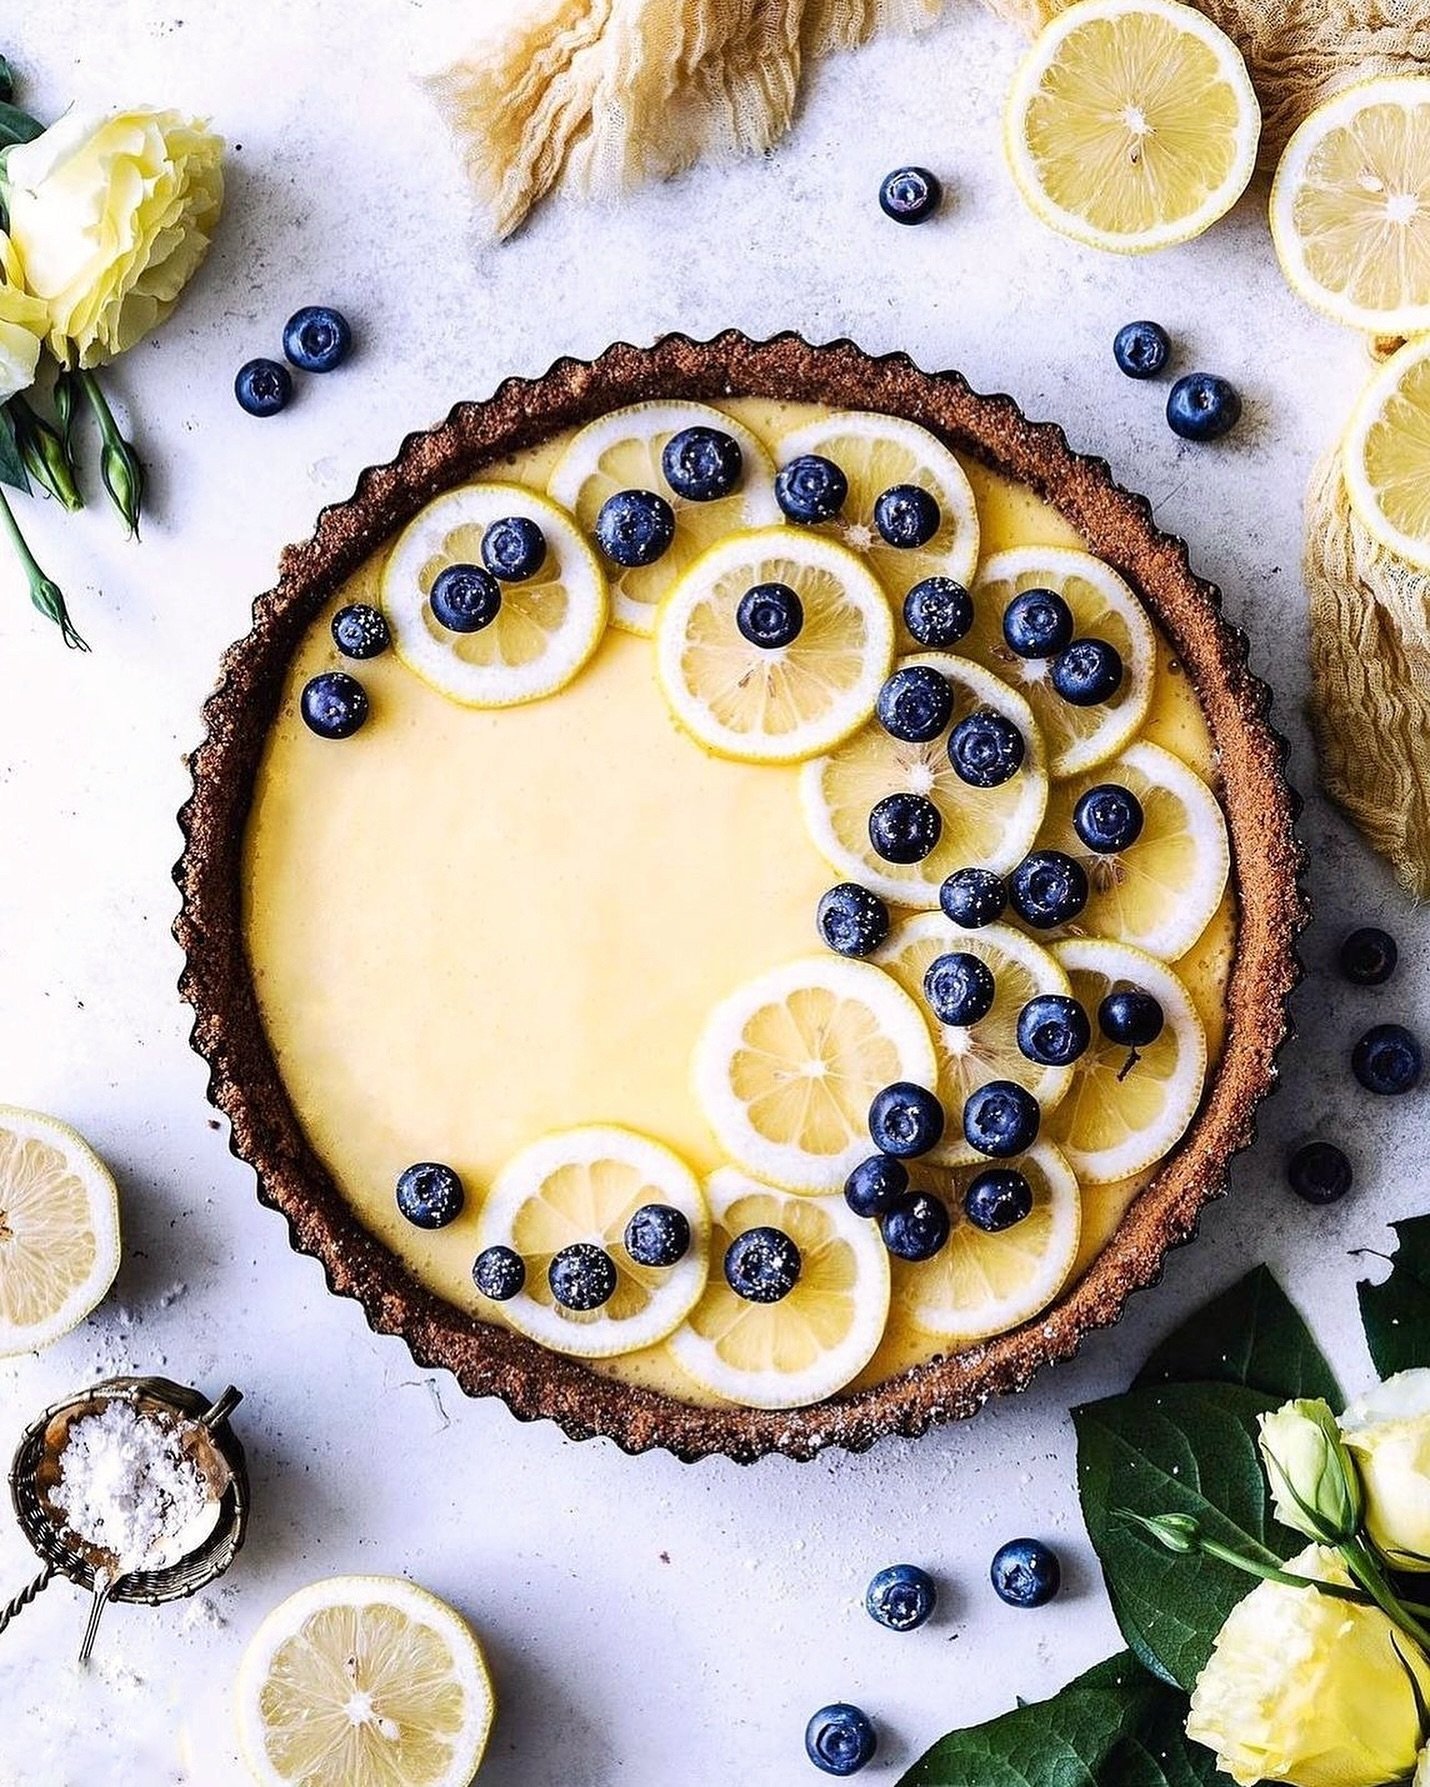 A simple Lemon Curd Tart is always a winner for early summer days, right?! 🍋 I&rsquo;m flirting in my mind already with new flavor combinations for the season!!

To make sure we are on the same page, vote for your favorite or leave me a comment with